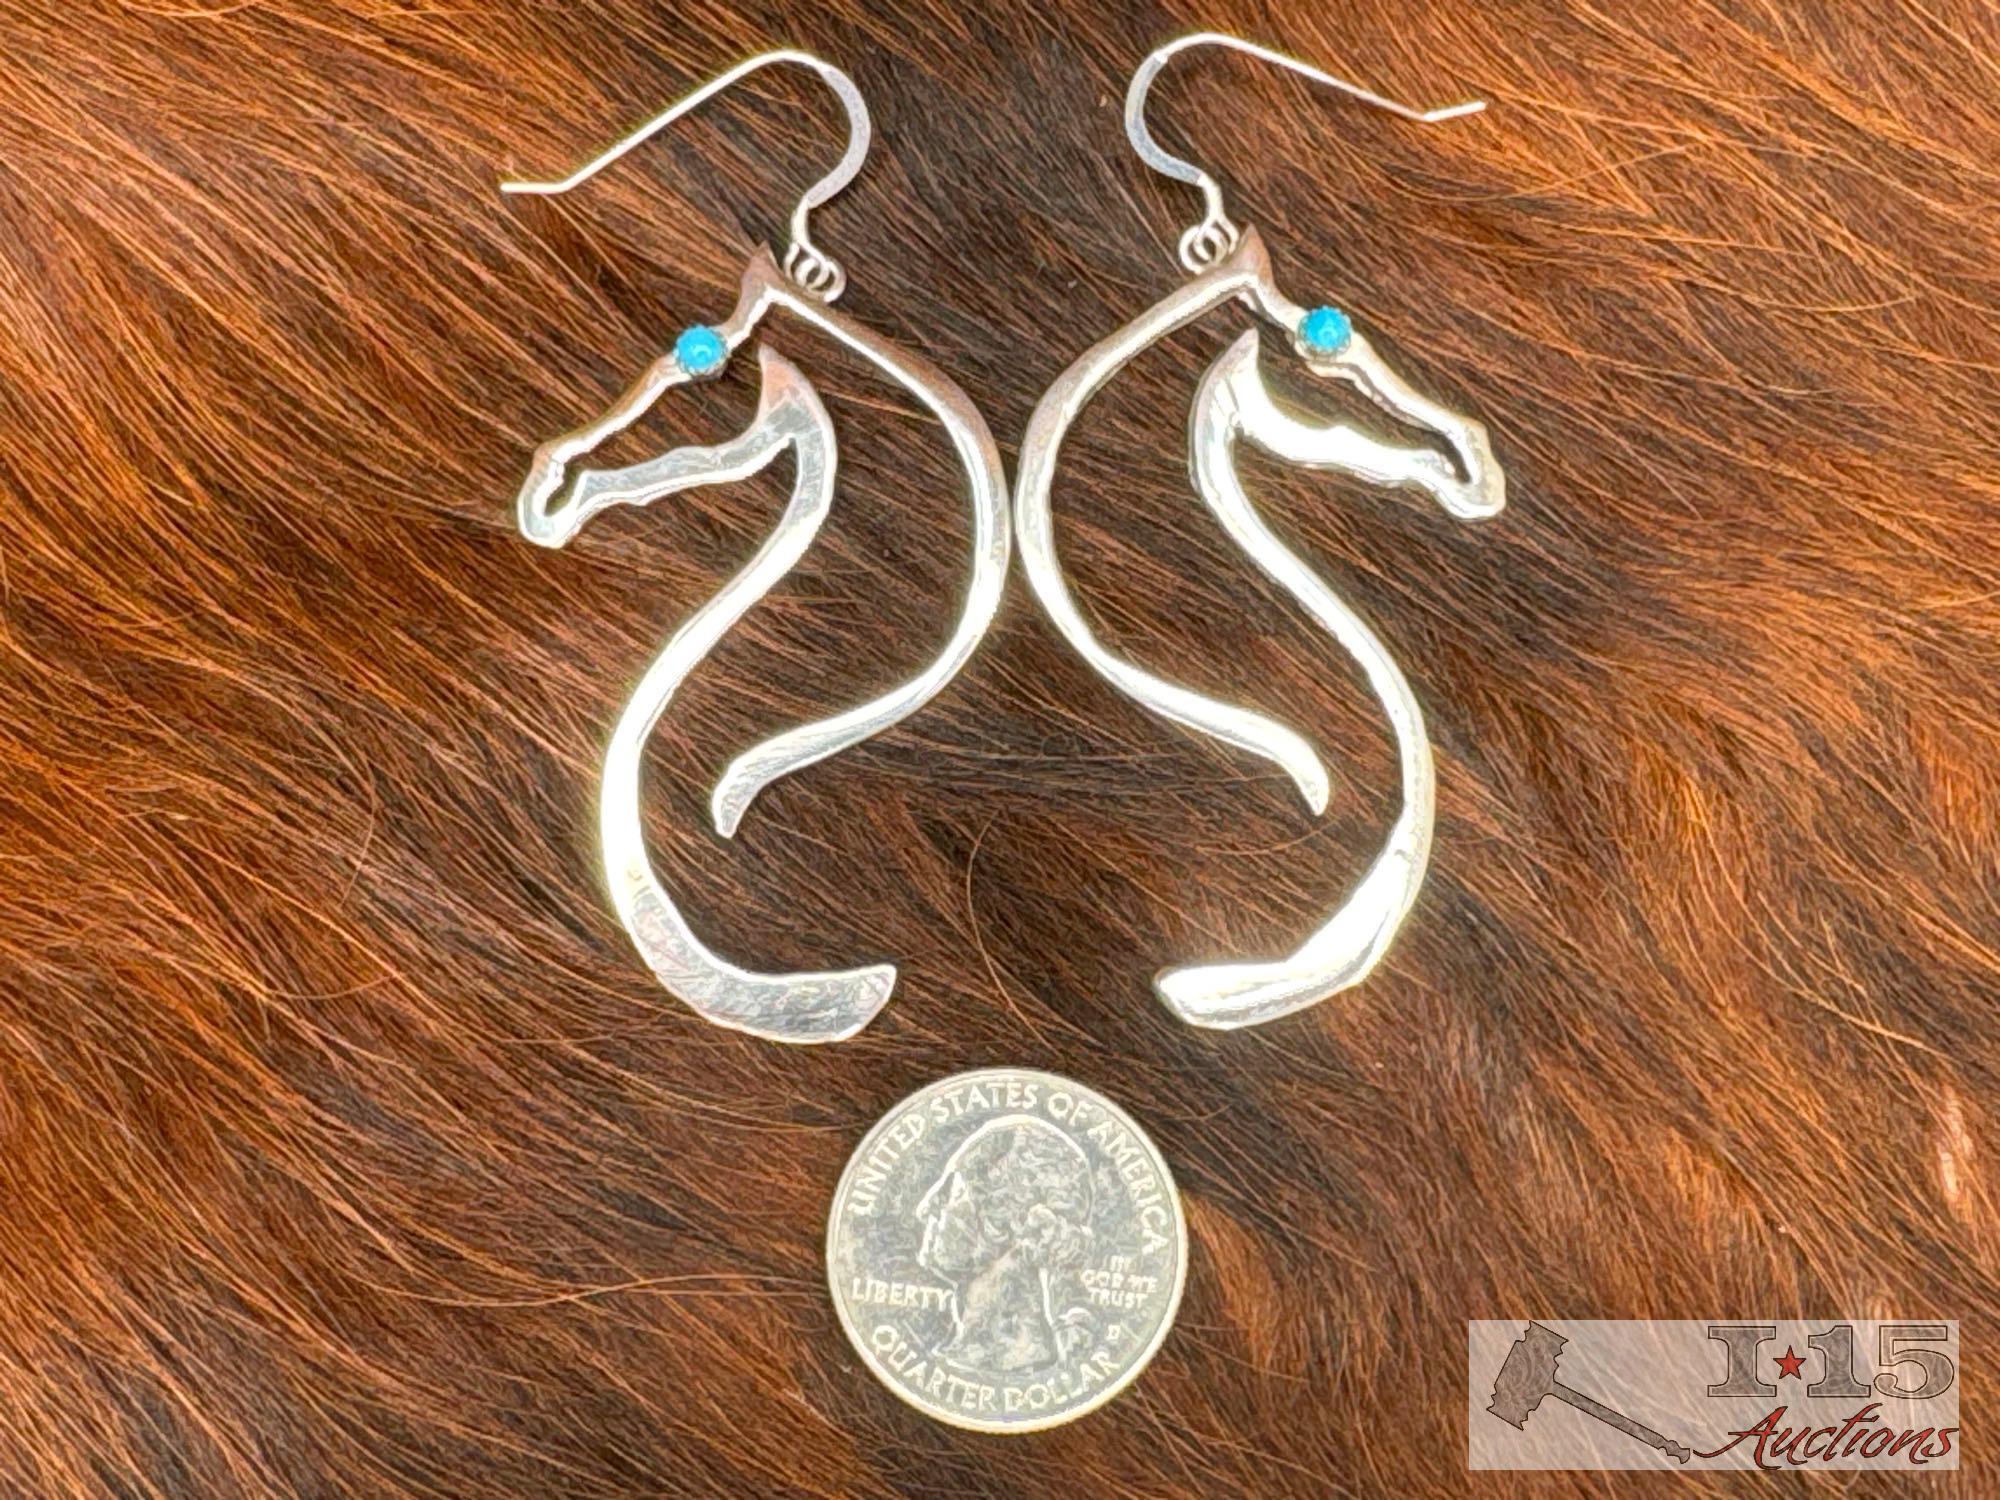 Native American Sterling Silver Horse Earrings with Turquoise Stones, 12g